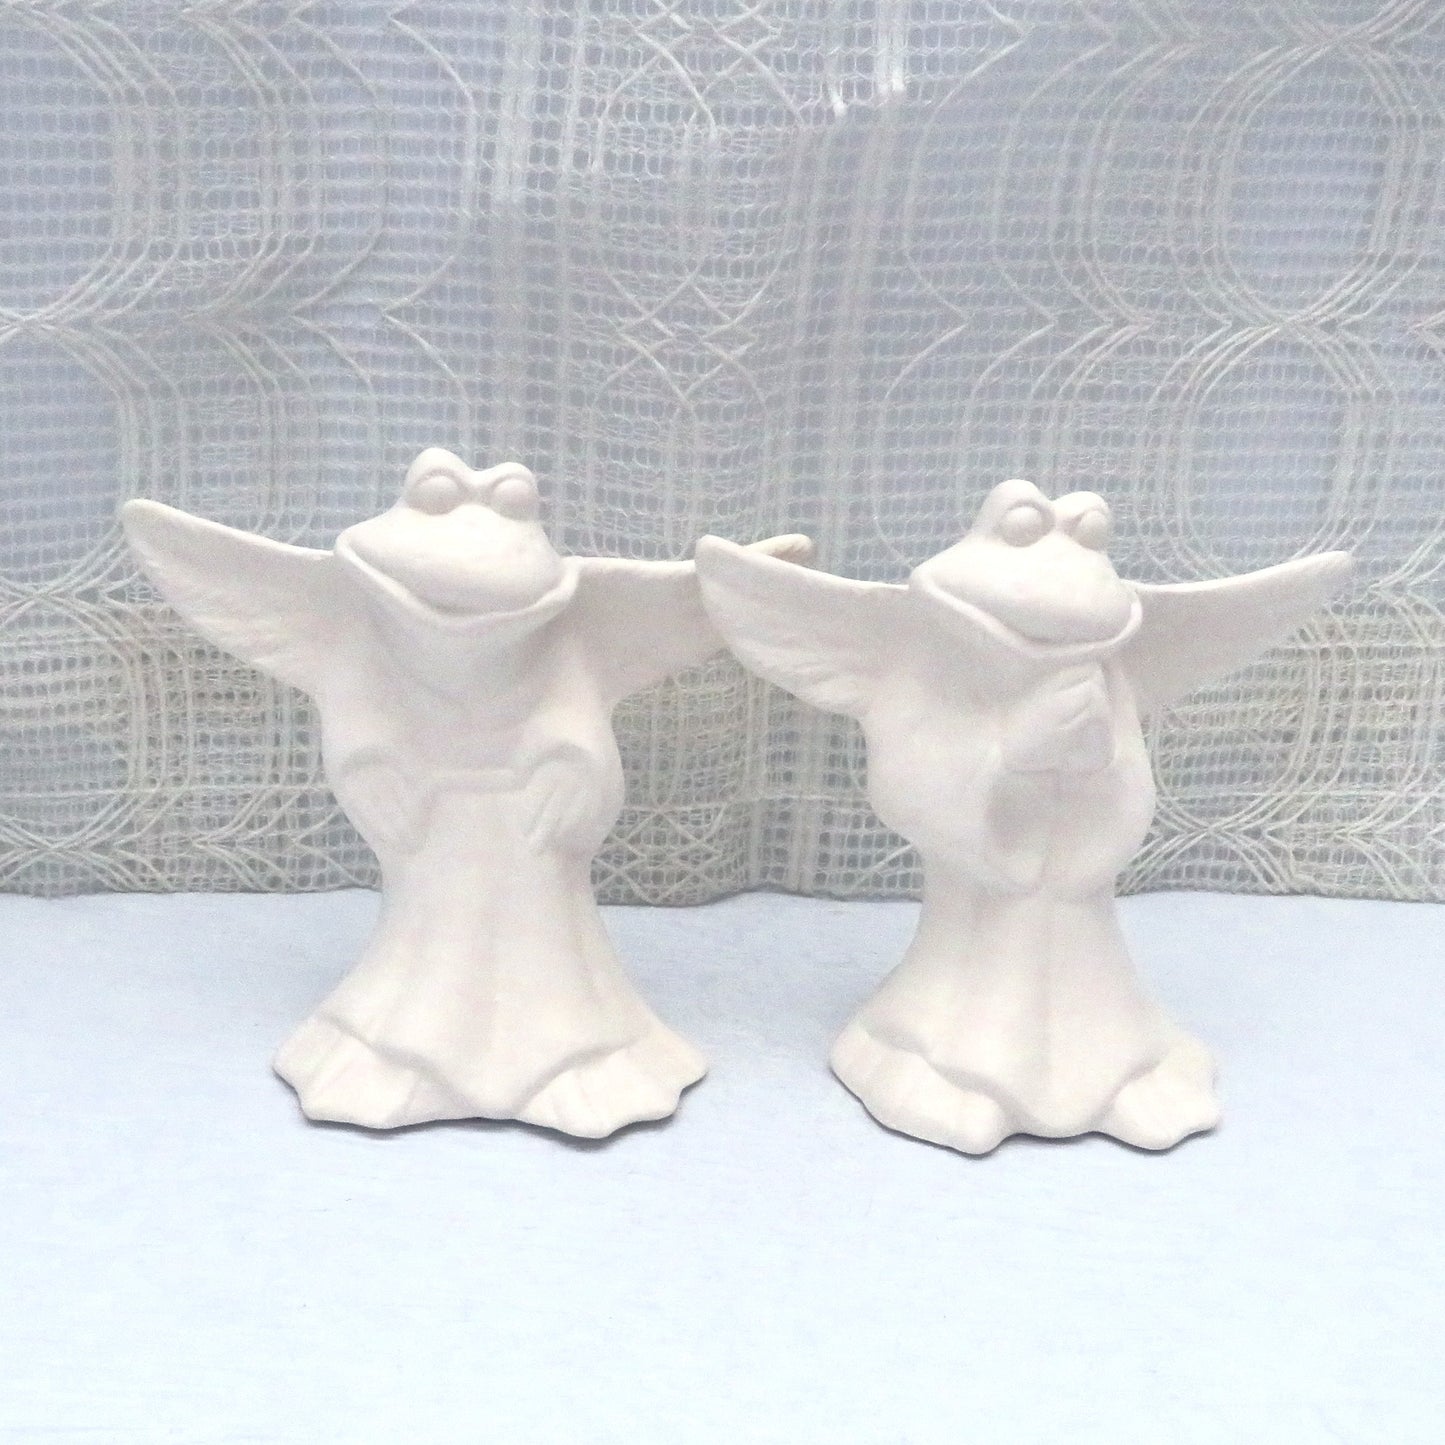 2 ready to paint ceramic frog angels standing on a pale blue table with an ecru lacy curtain behind them.  One has its hands at his sides.  The other has its hands in the prayer position.  The wings are outstretched.